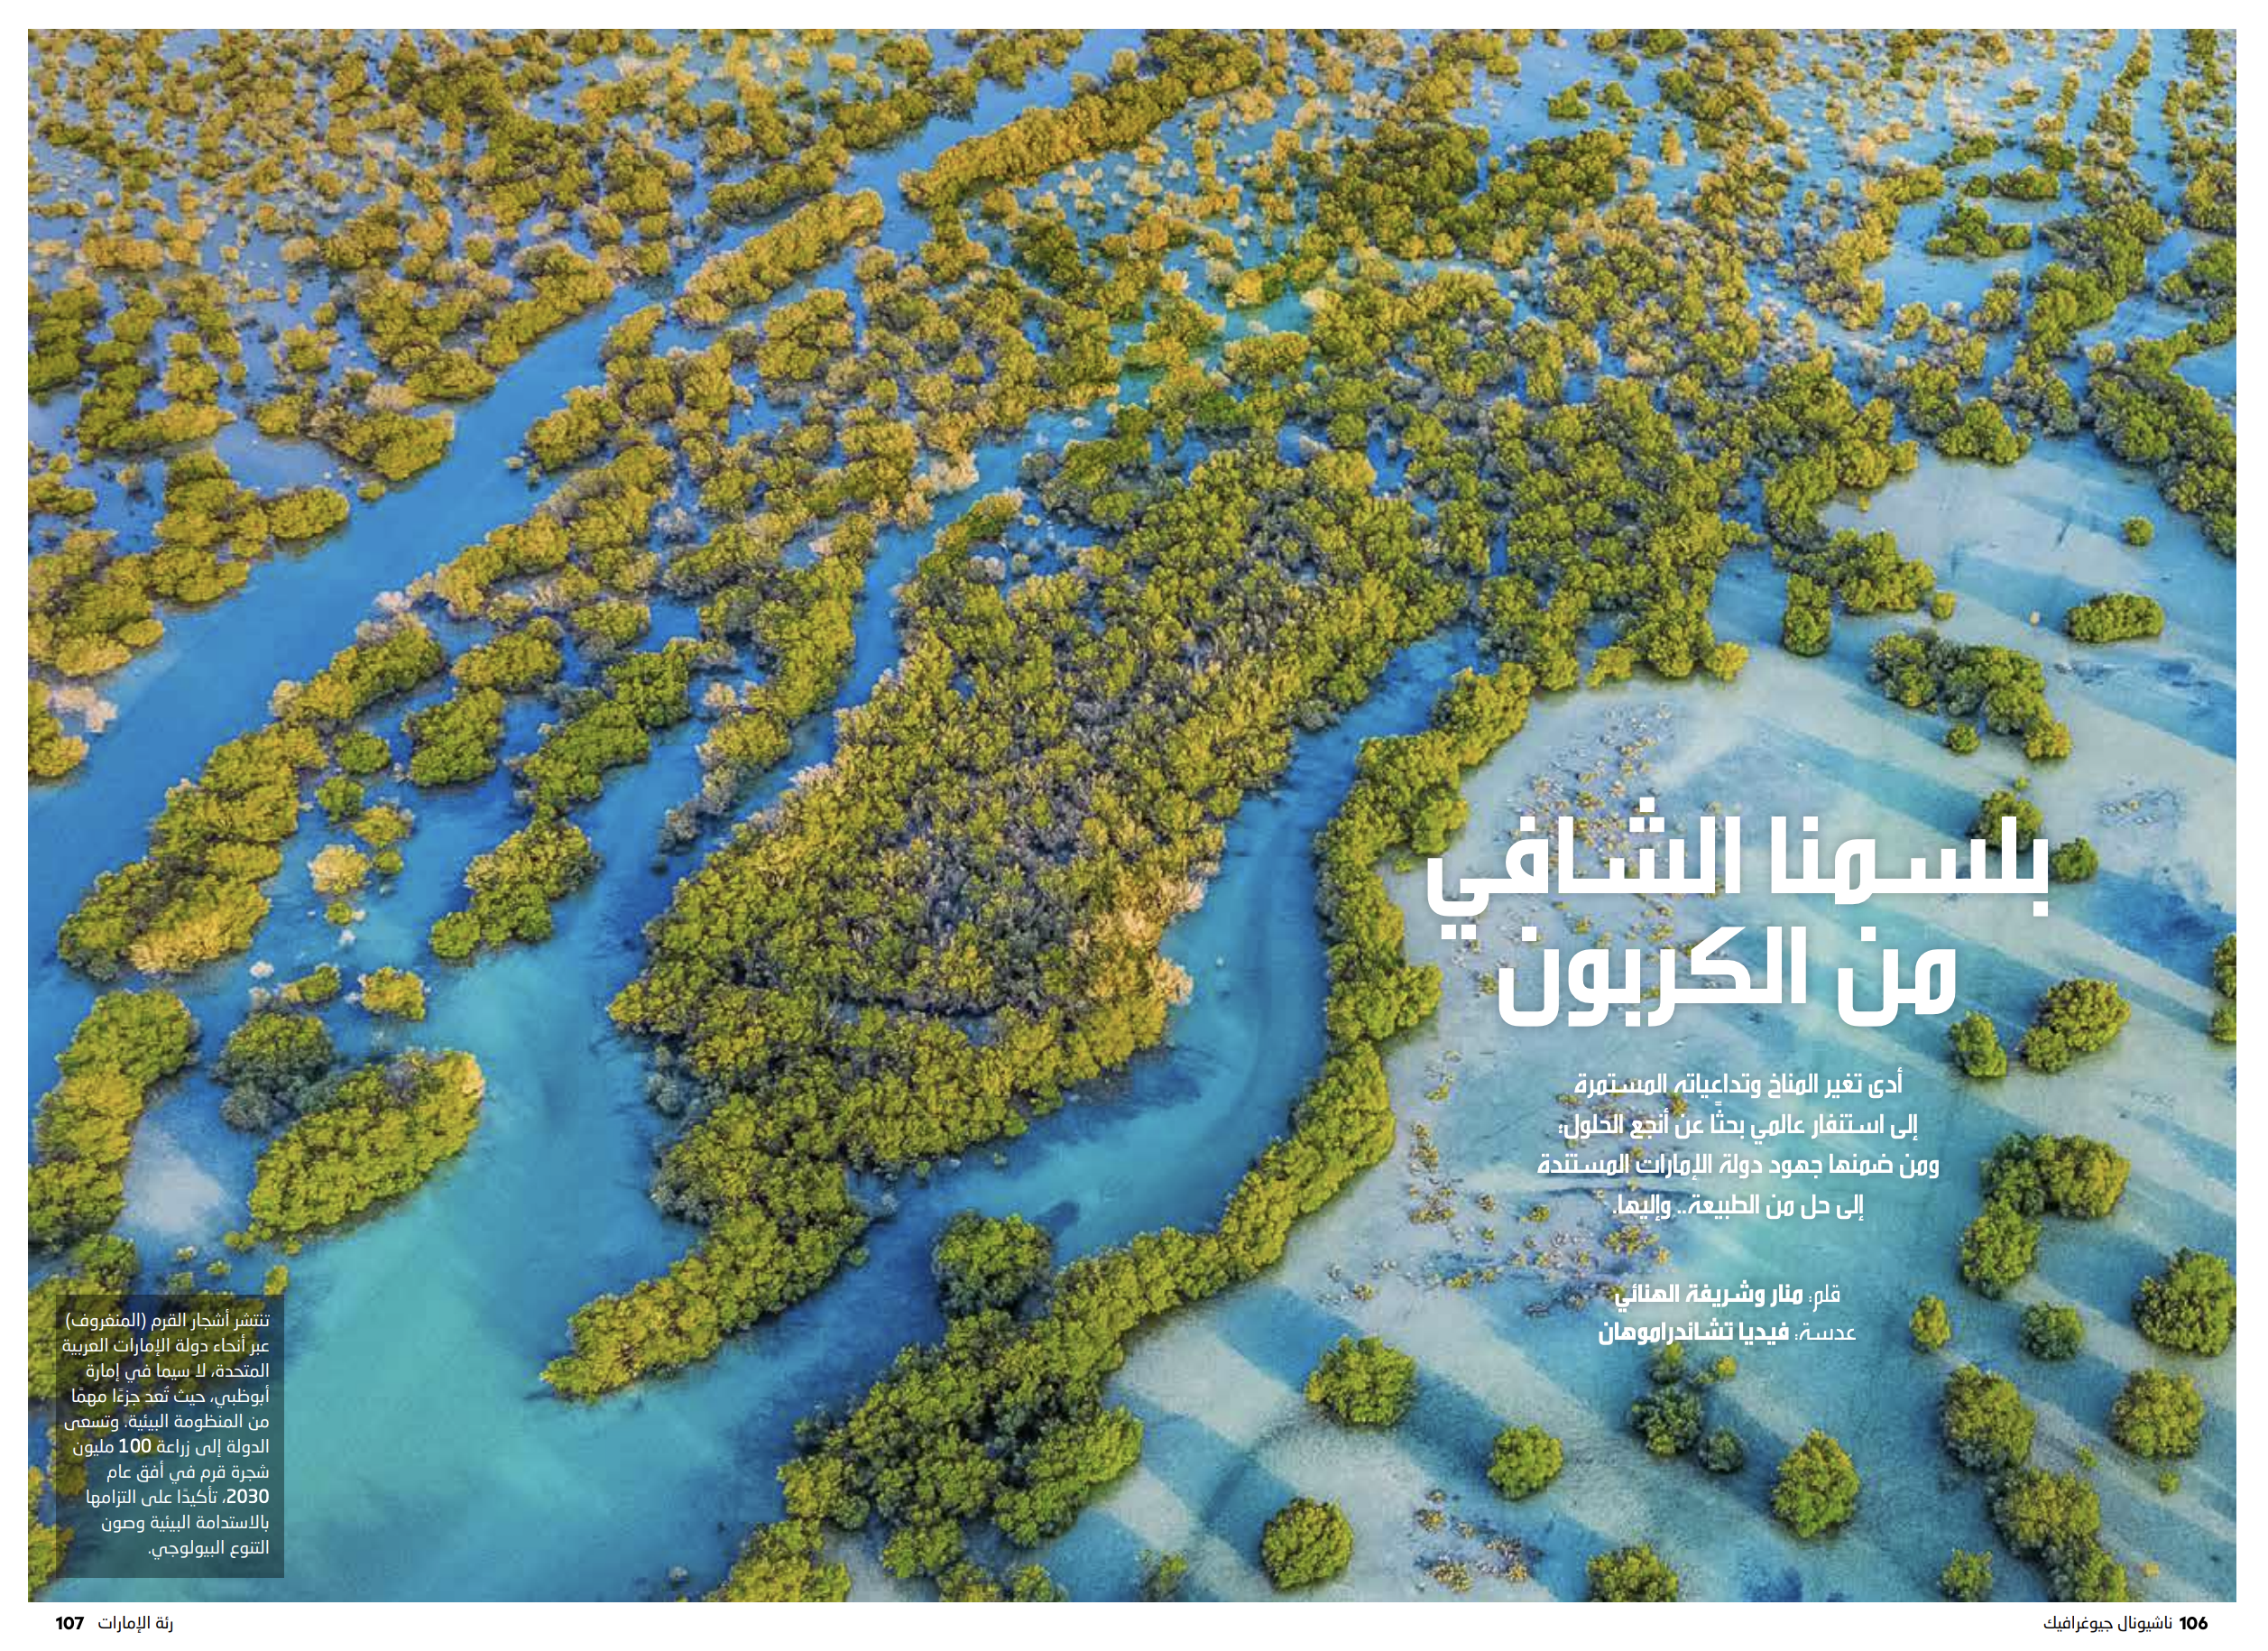 Mangroves - UAE published in National Geographic Arabia 2023